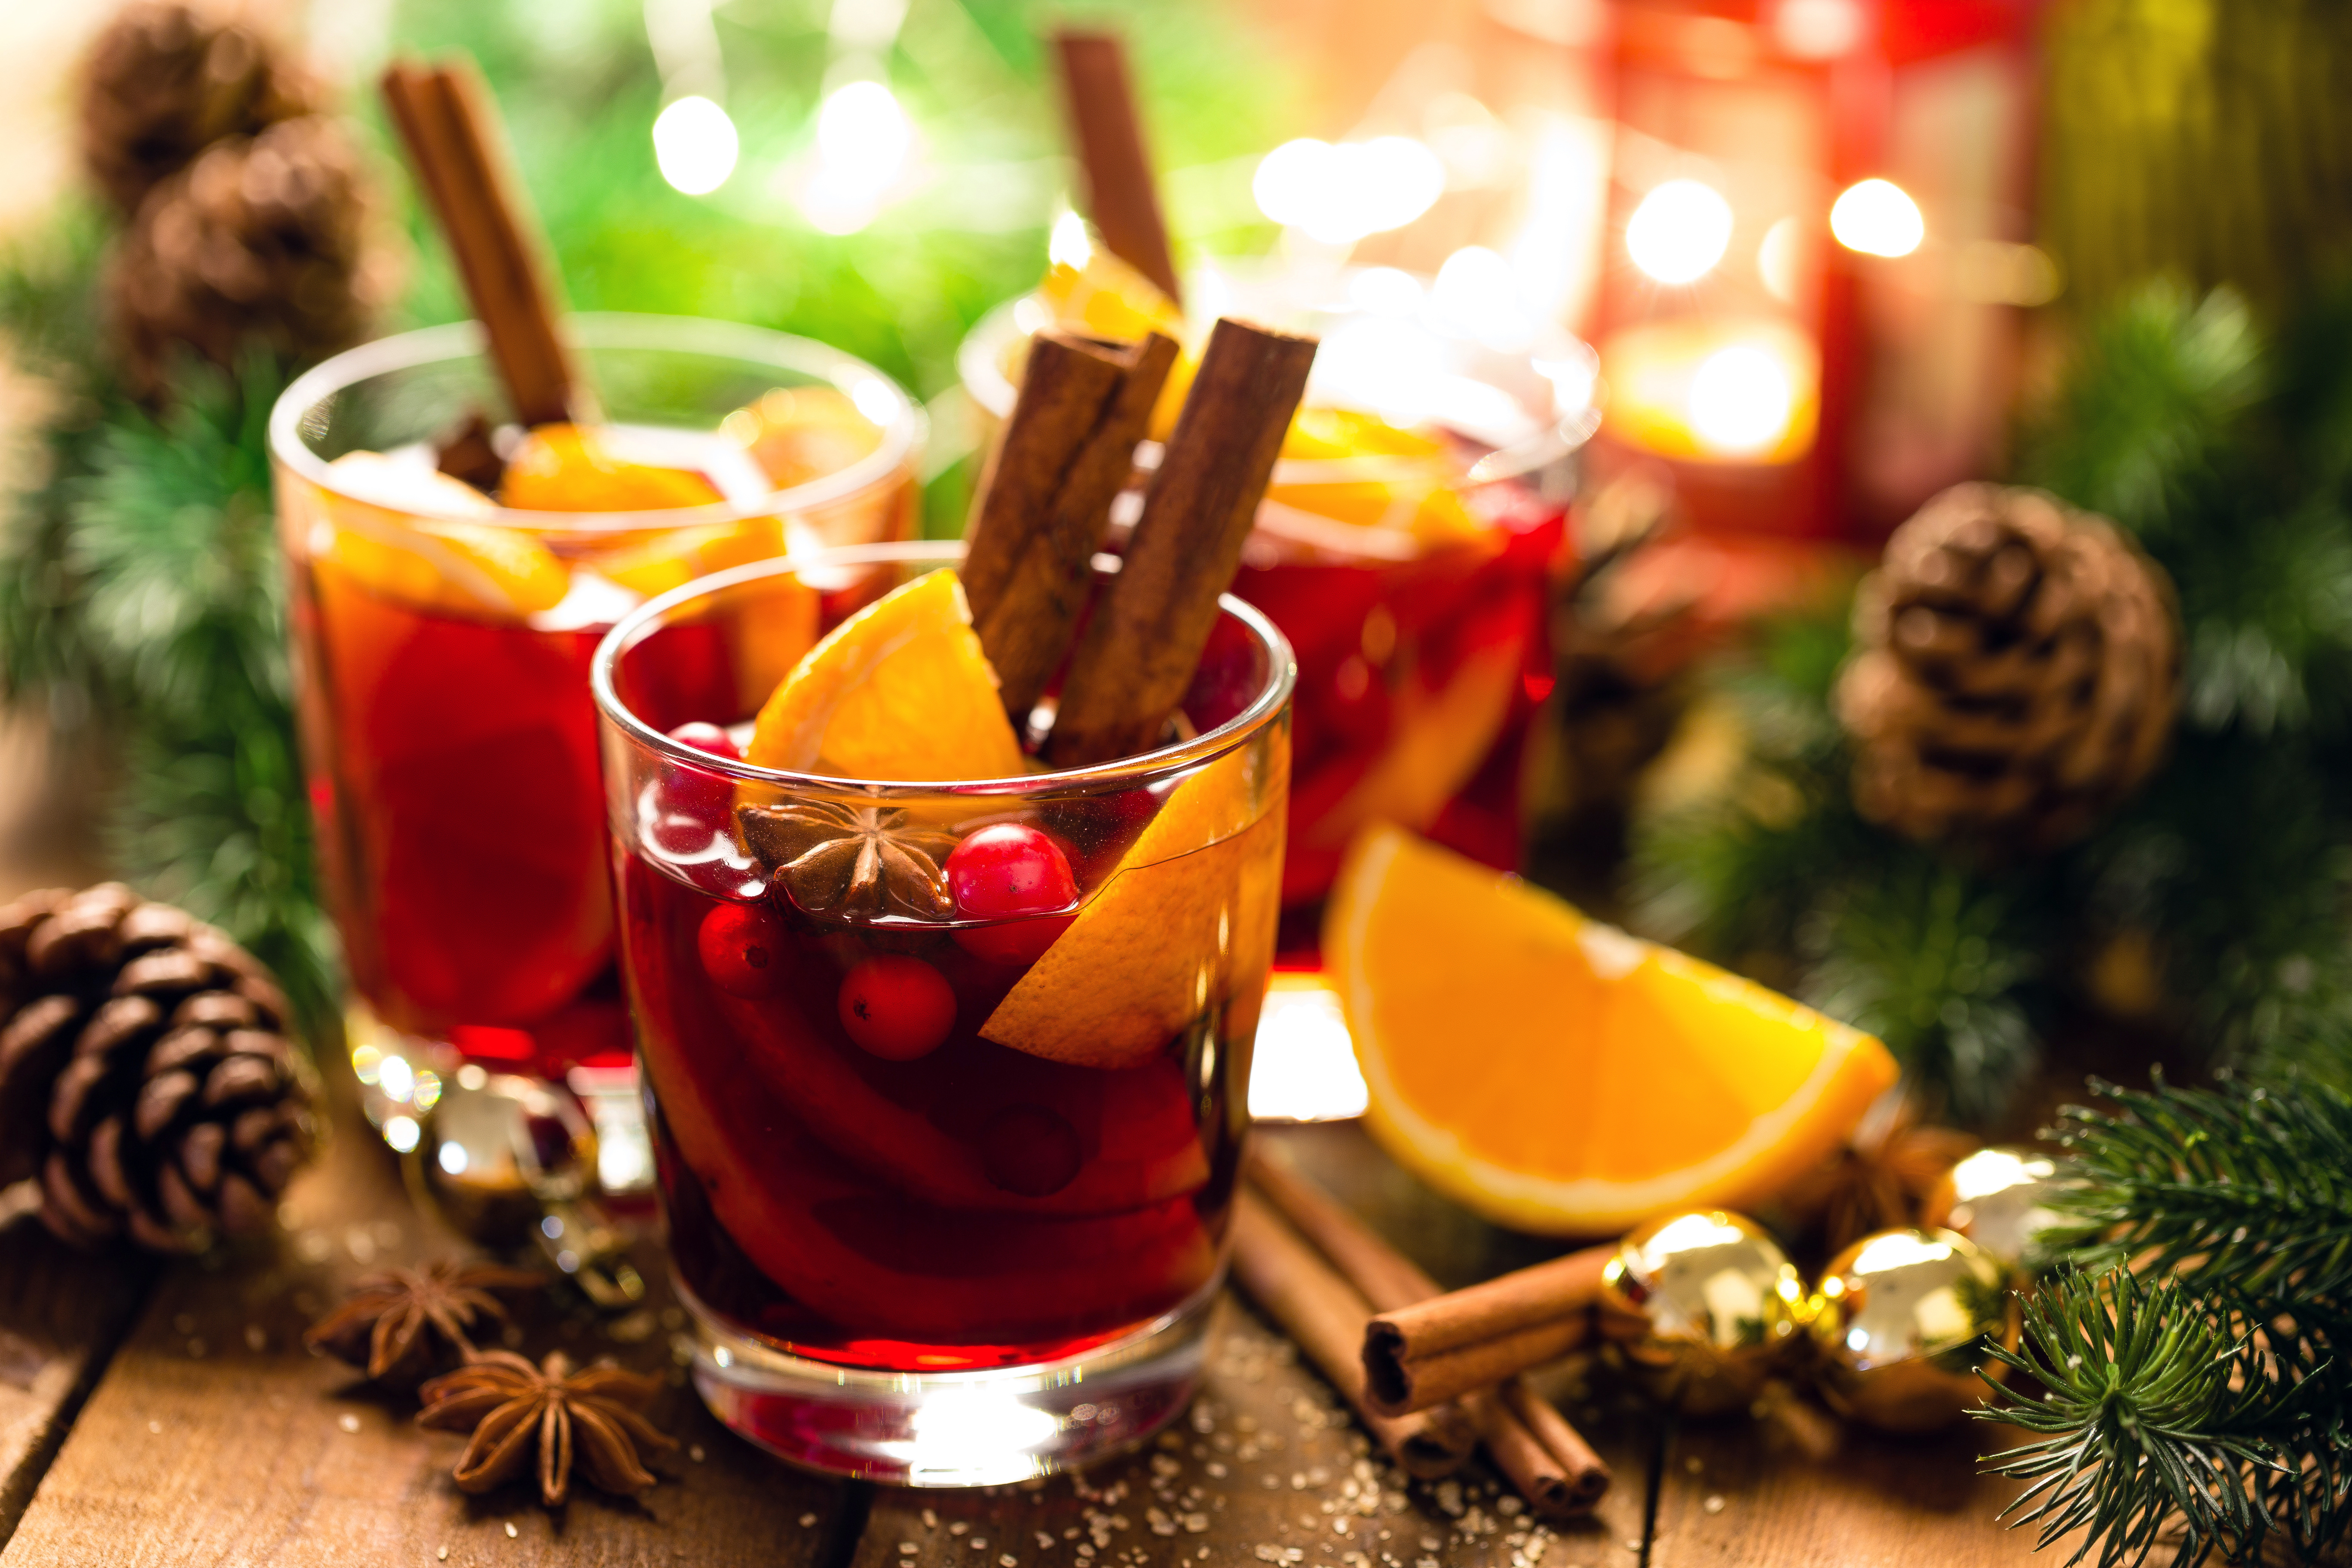 Christmas mulled red wine with spices and oranges on a wooden rustic table